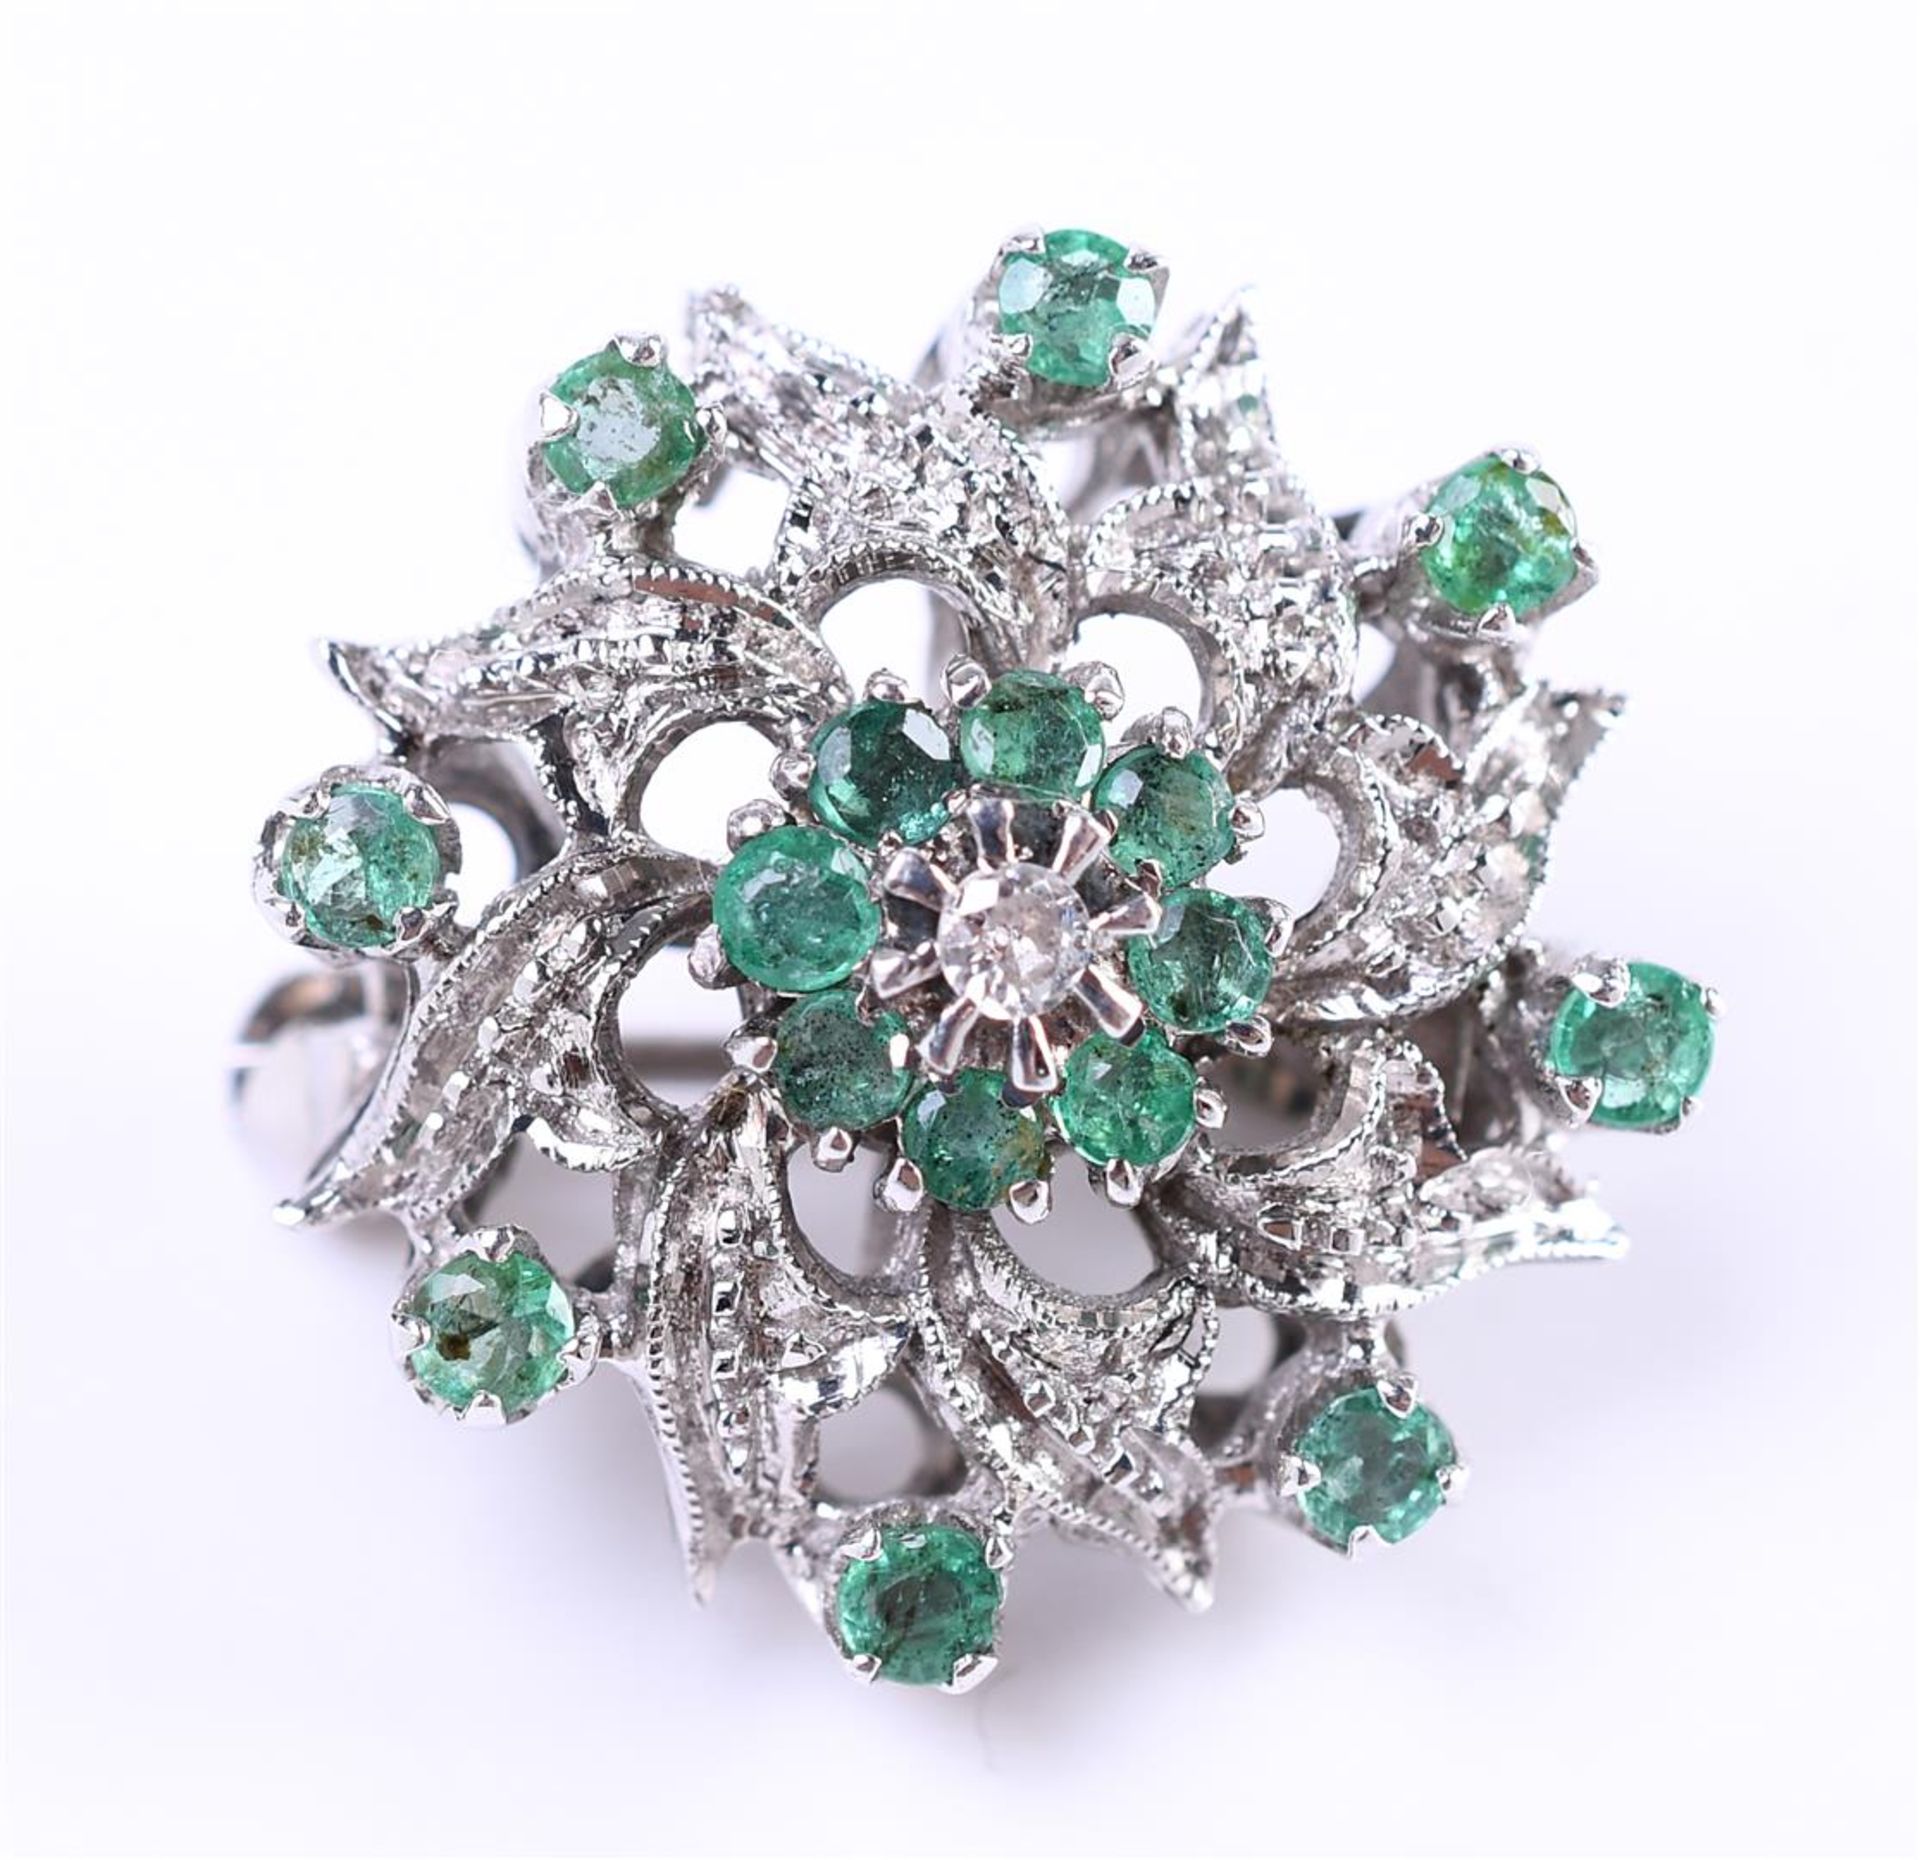 18 carat white gold cluster brooch, set with approximately 16 brilliant cut emeralds